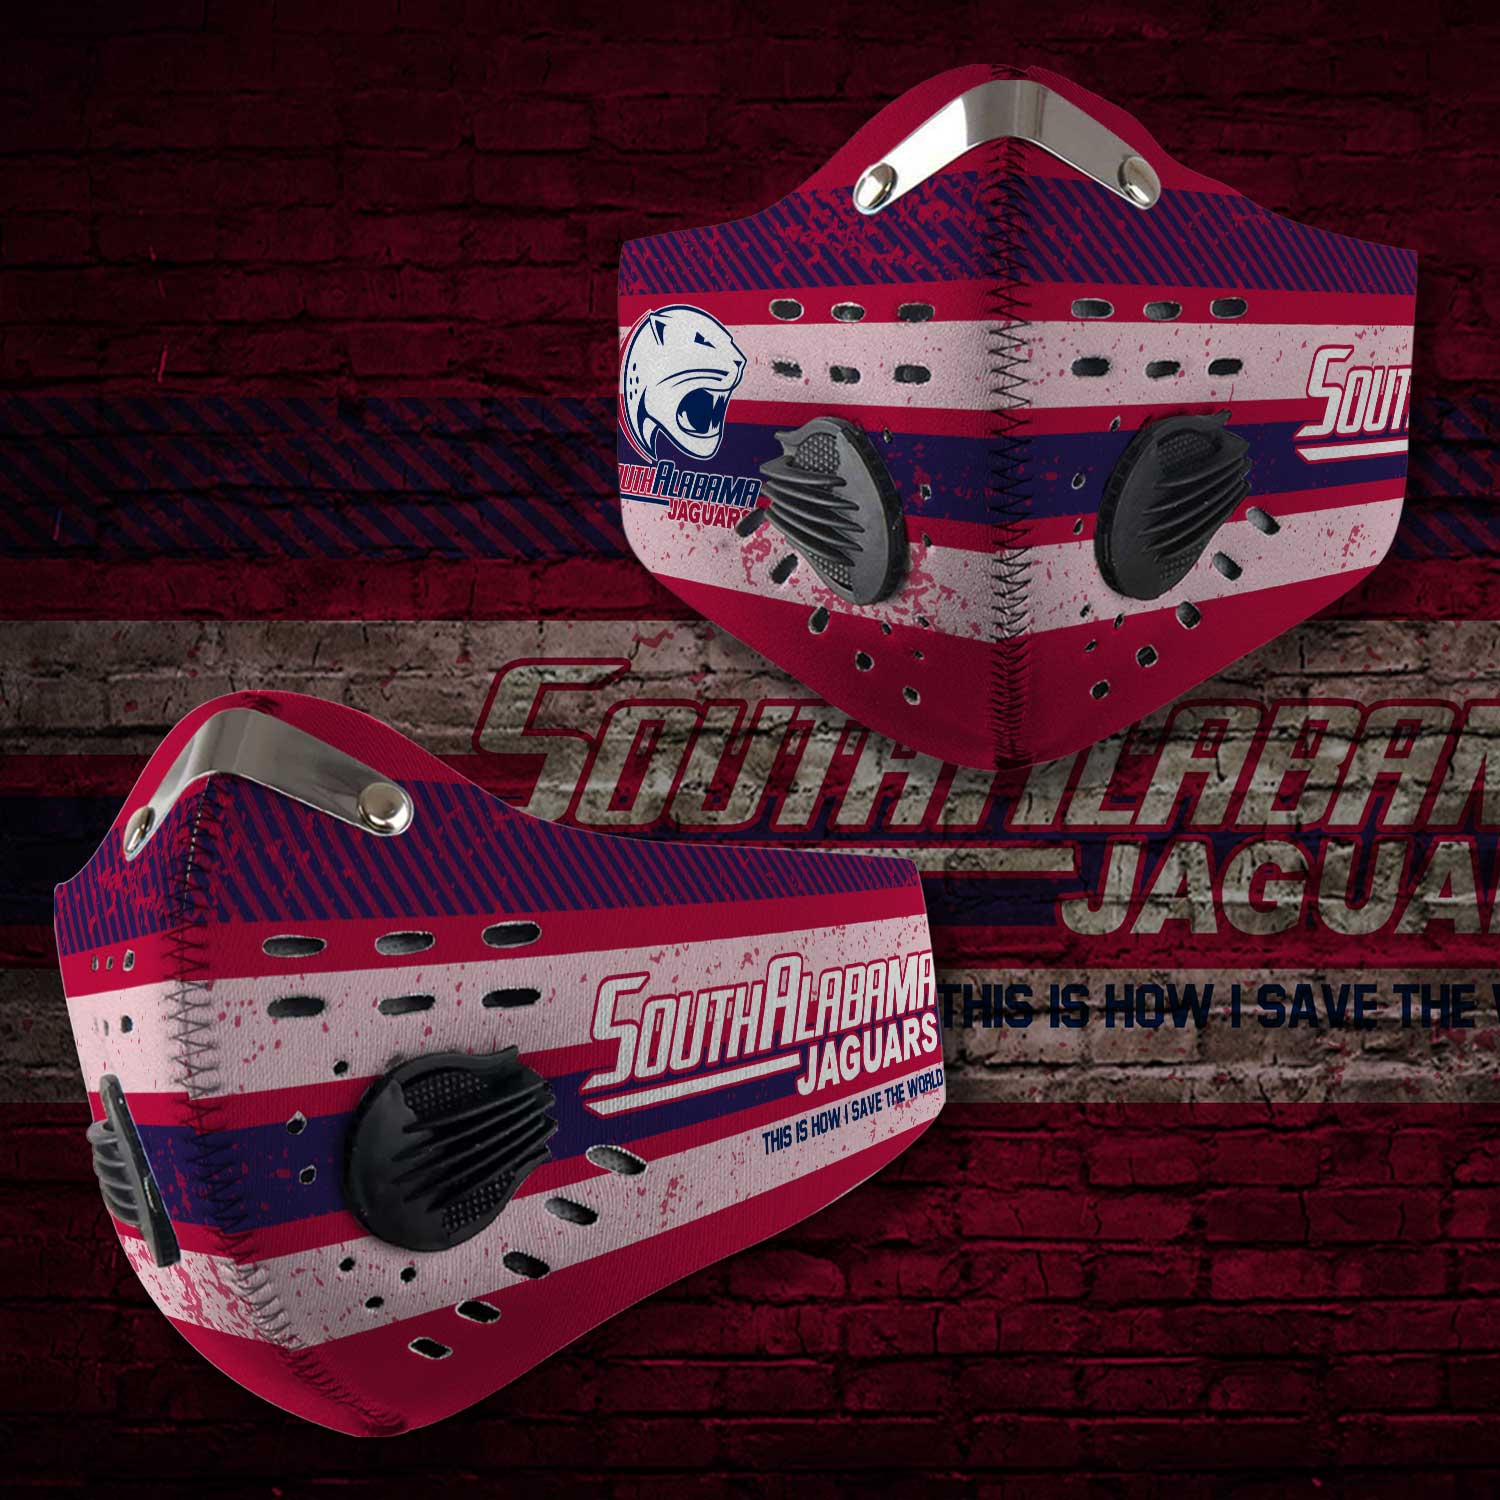 South alabama jaguars this is how i save the world face mask 2